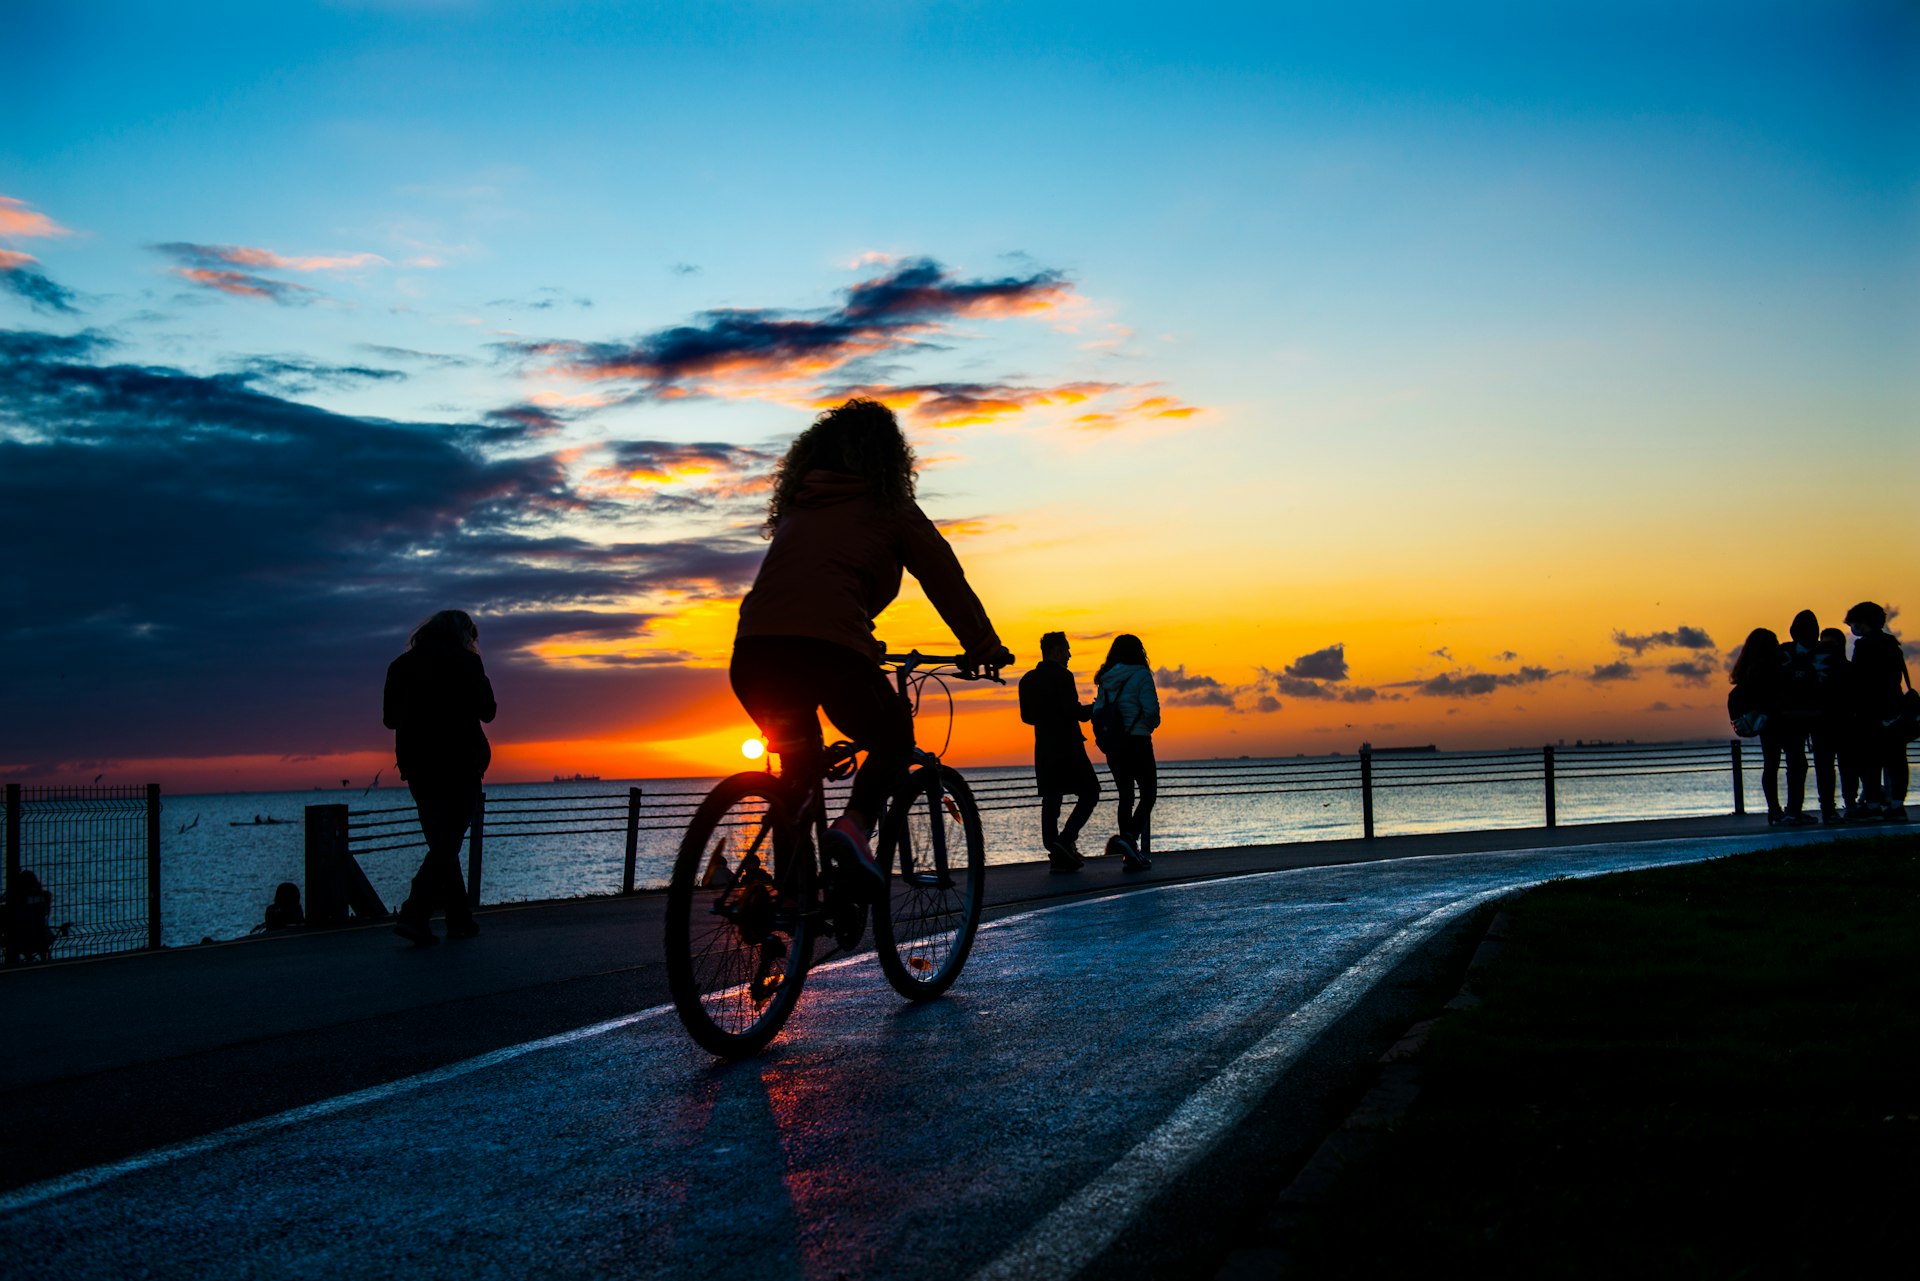 People ride bicycles at sunset in Caddebostan, Istanbul, Turkey